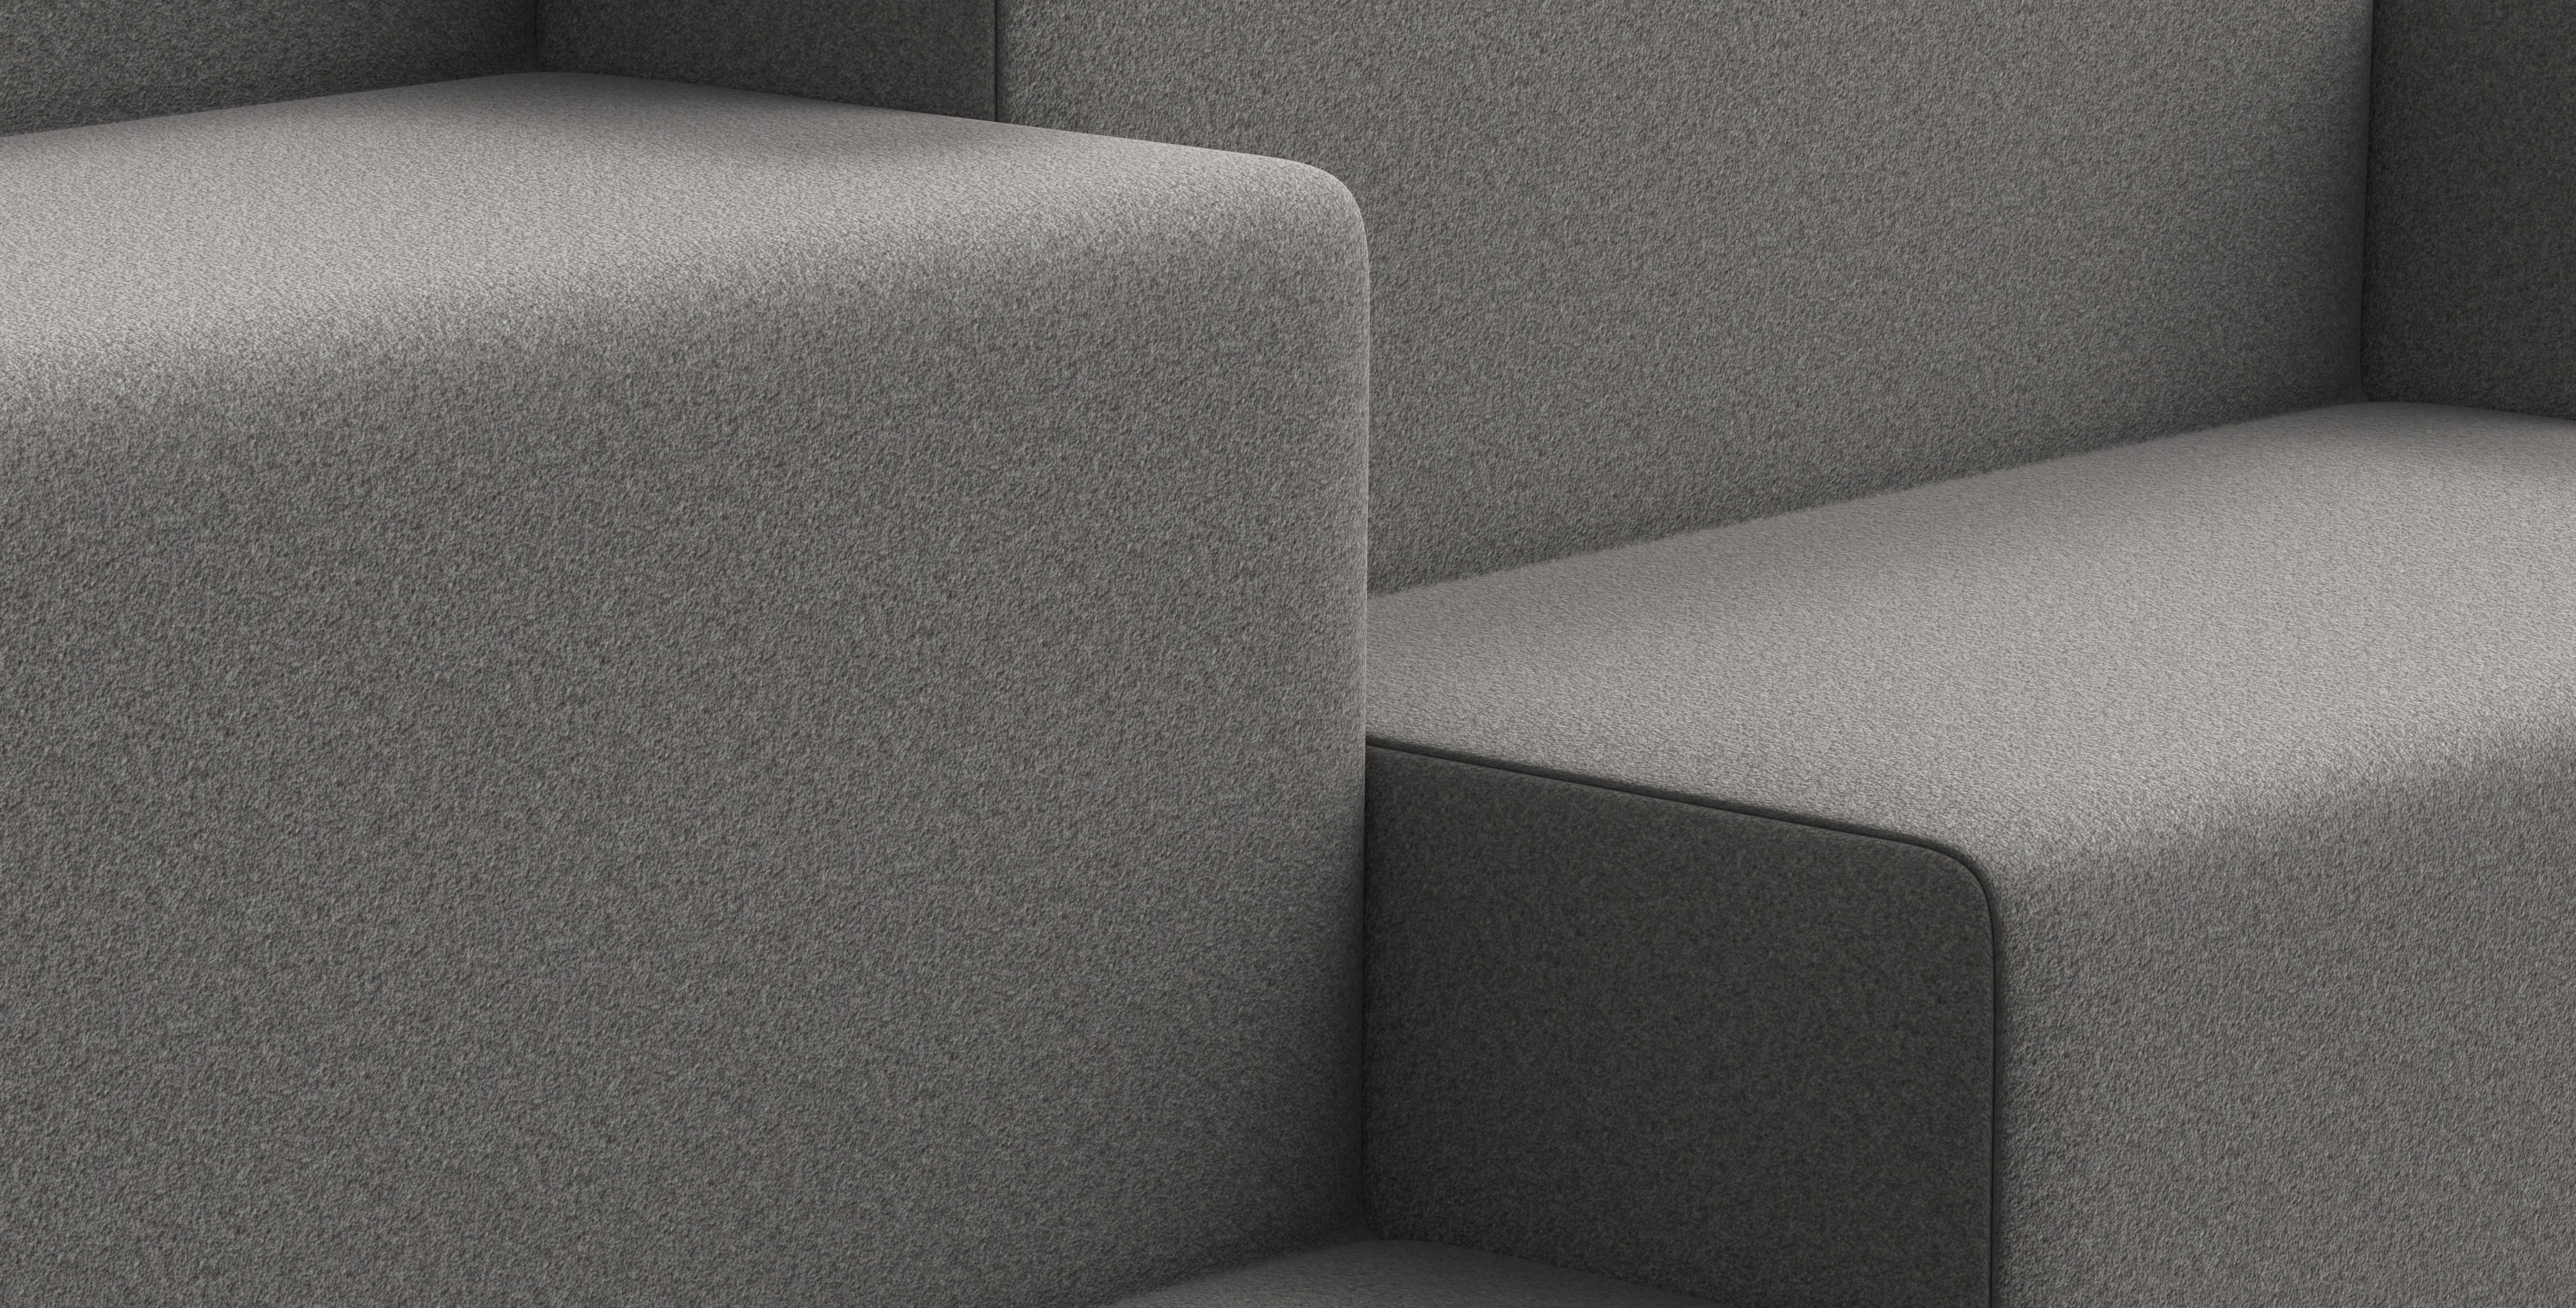 Close-up of an Allsteel Rise lounge configuration in dark grey fabric.